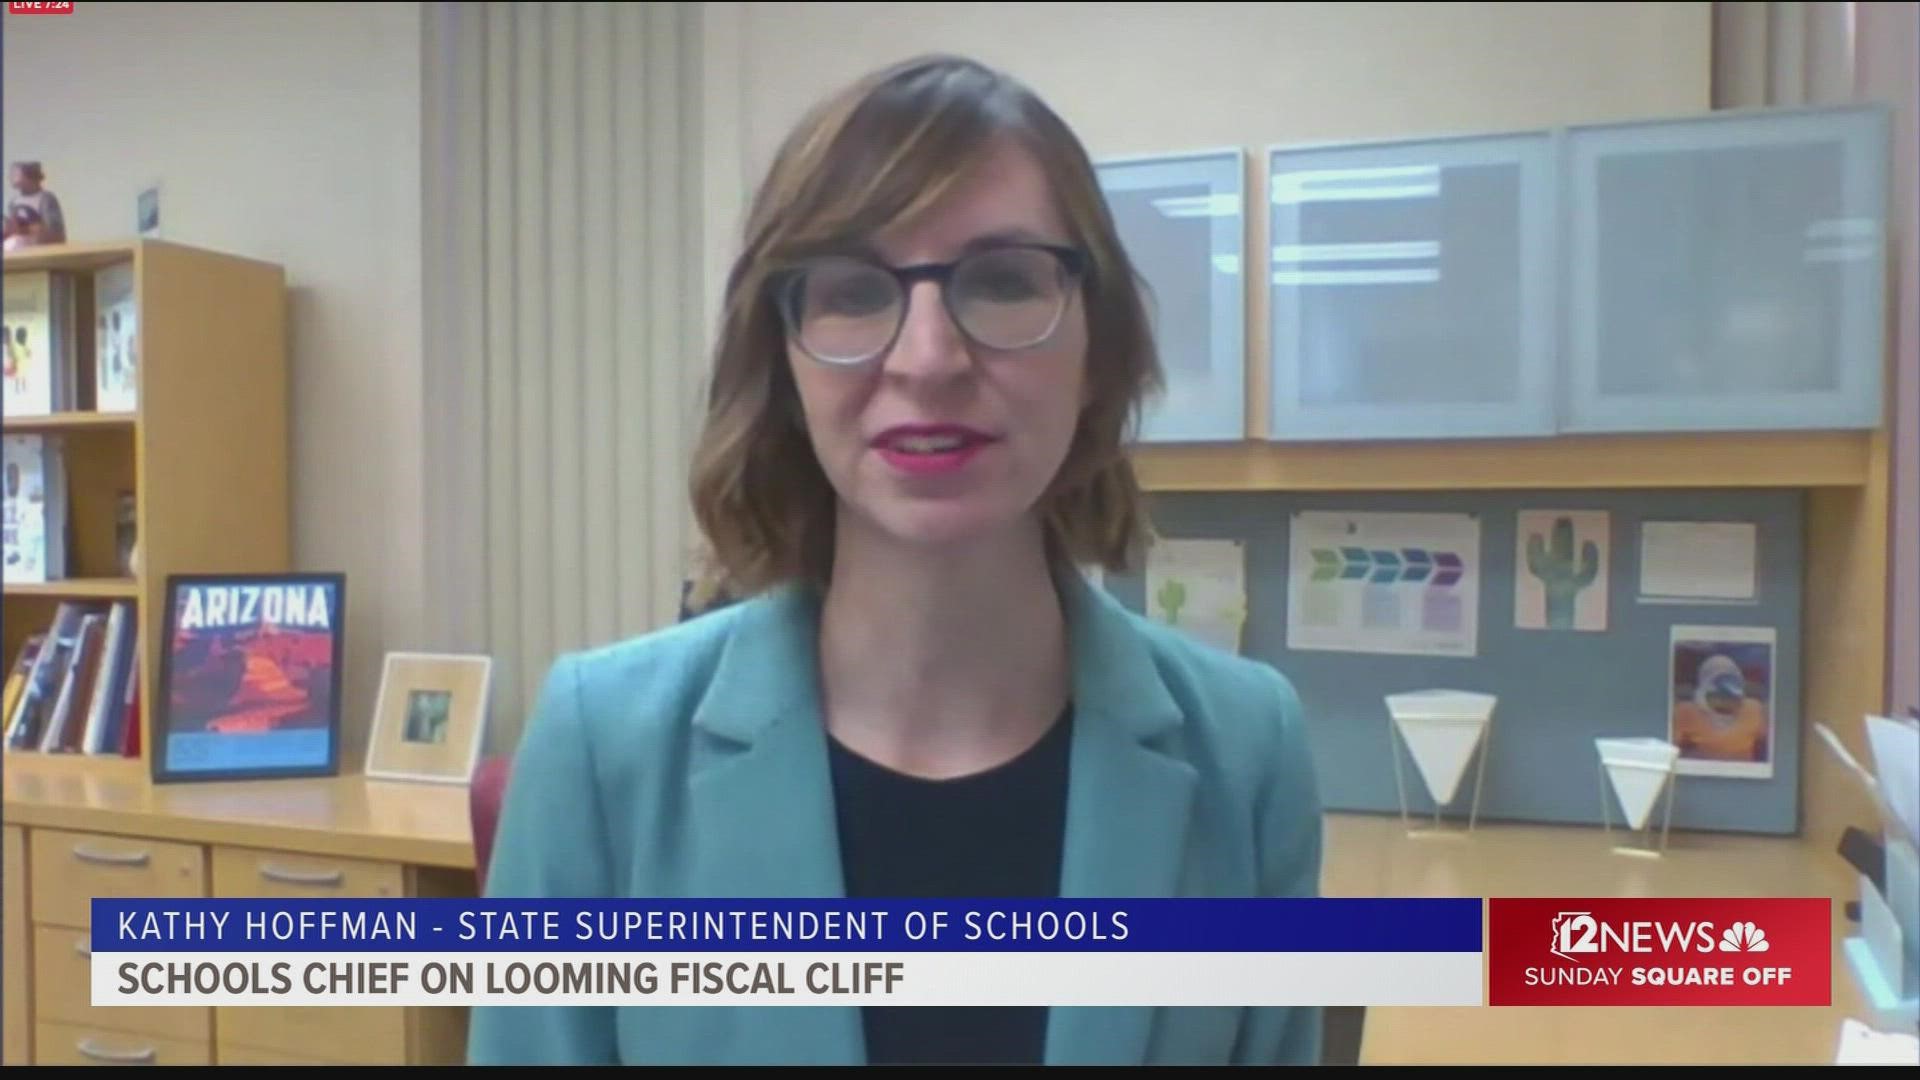 Arizona School Superintendent Kathy Hoffman discusses what needs to be done to avoid a looming fiscal cliff for public schools